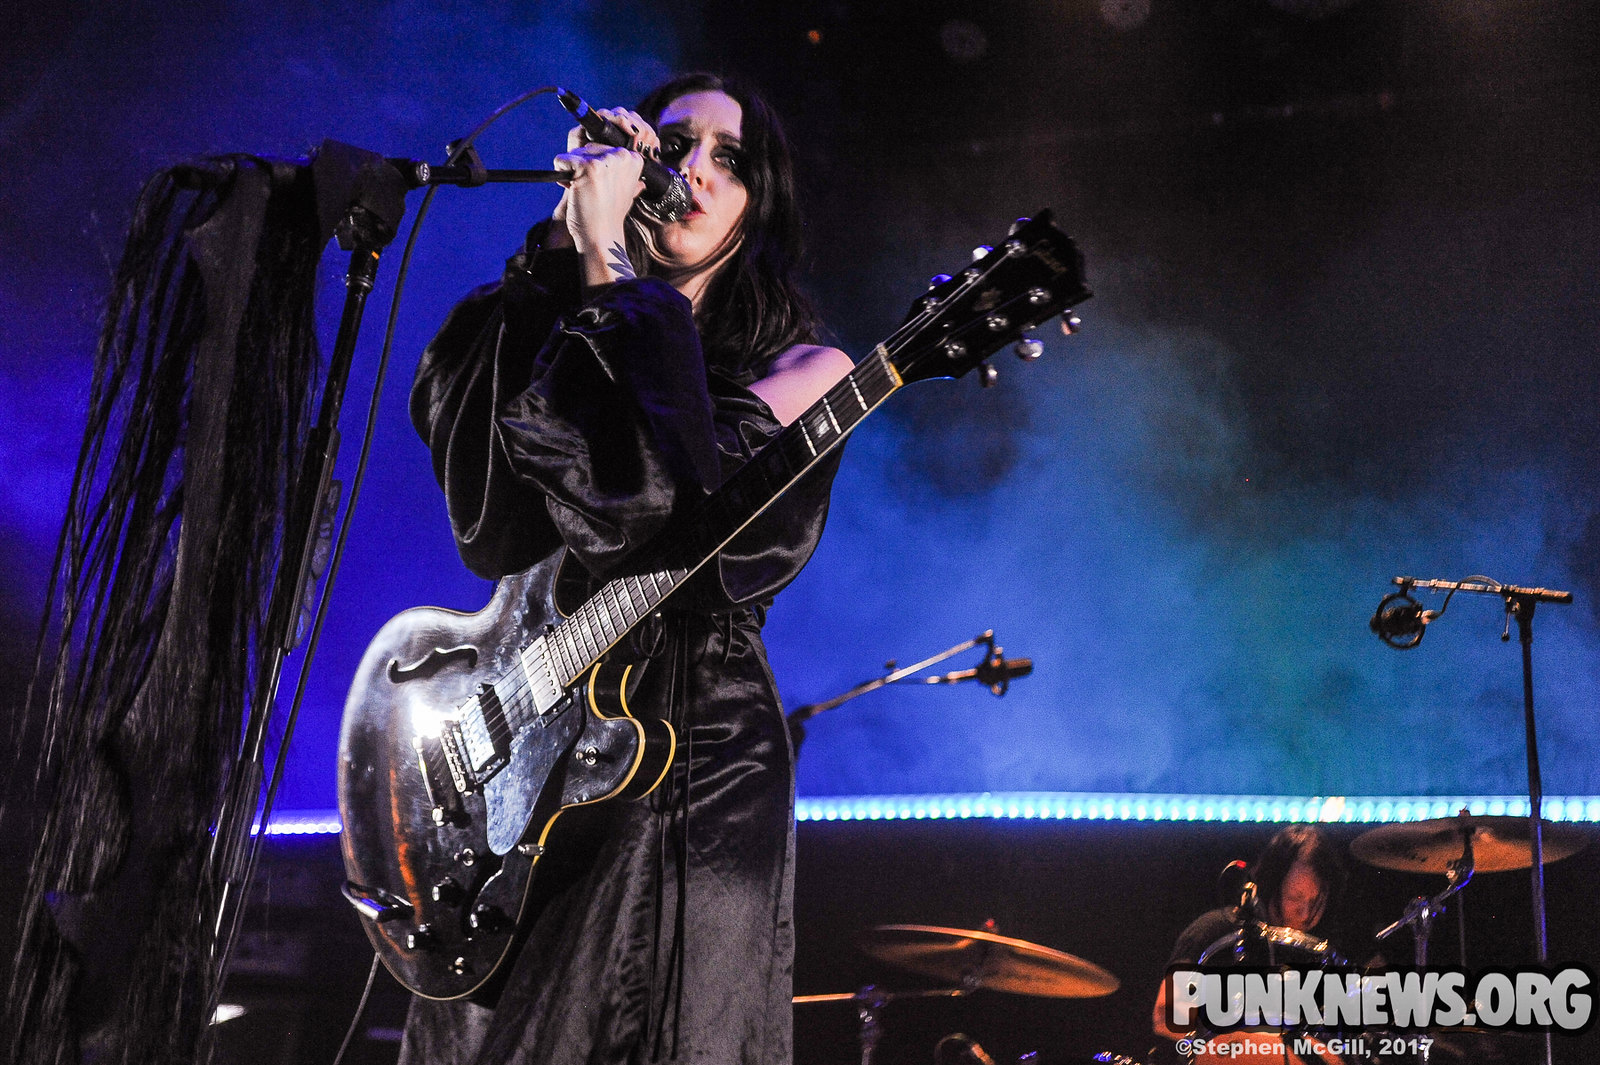 Chelsea Wolfe at The Opera House, 10/21